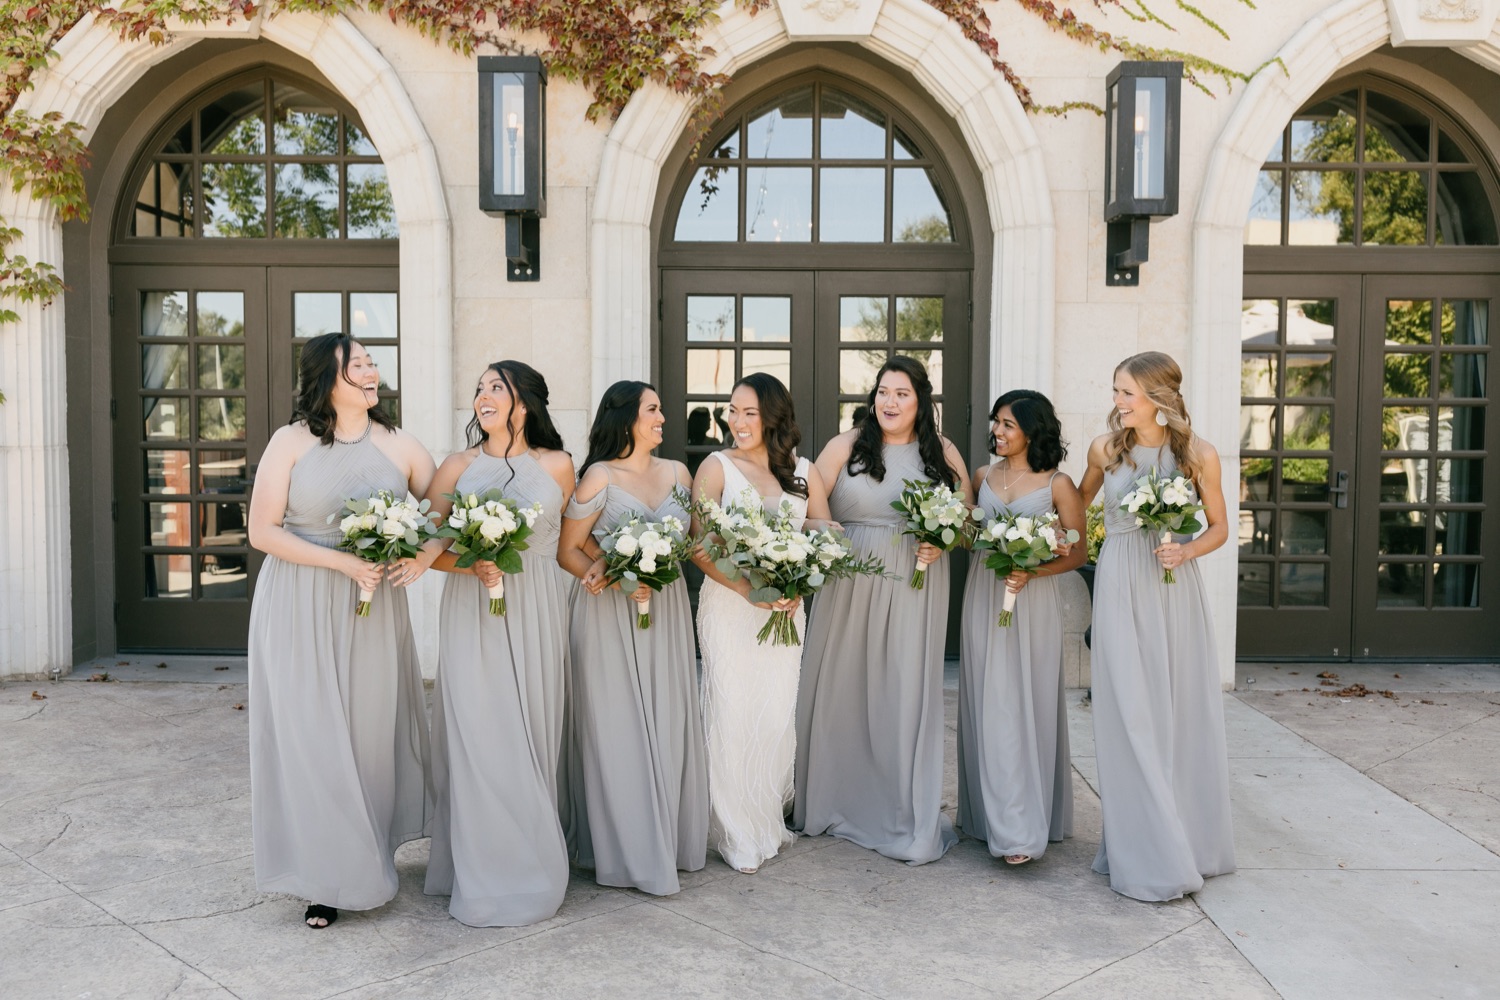 candid Bridesmaids photos at tooth and nail winery in paso robles california